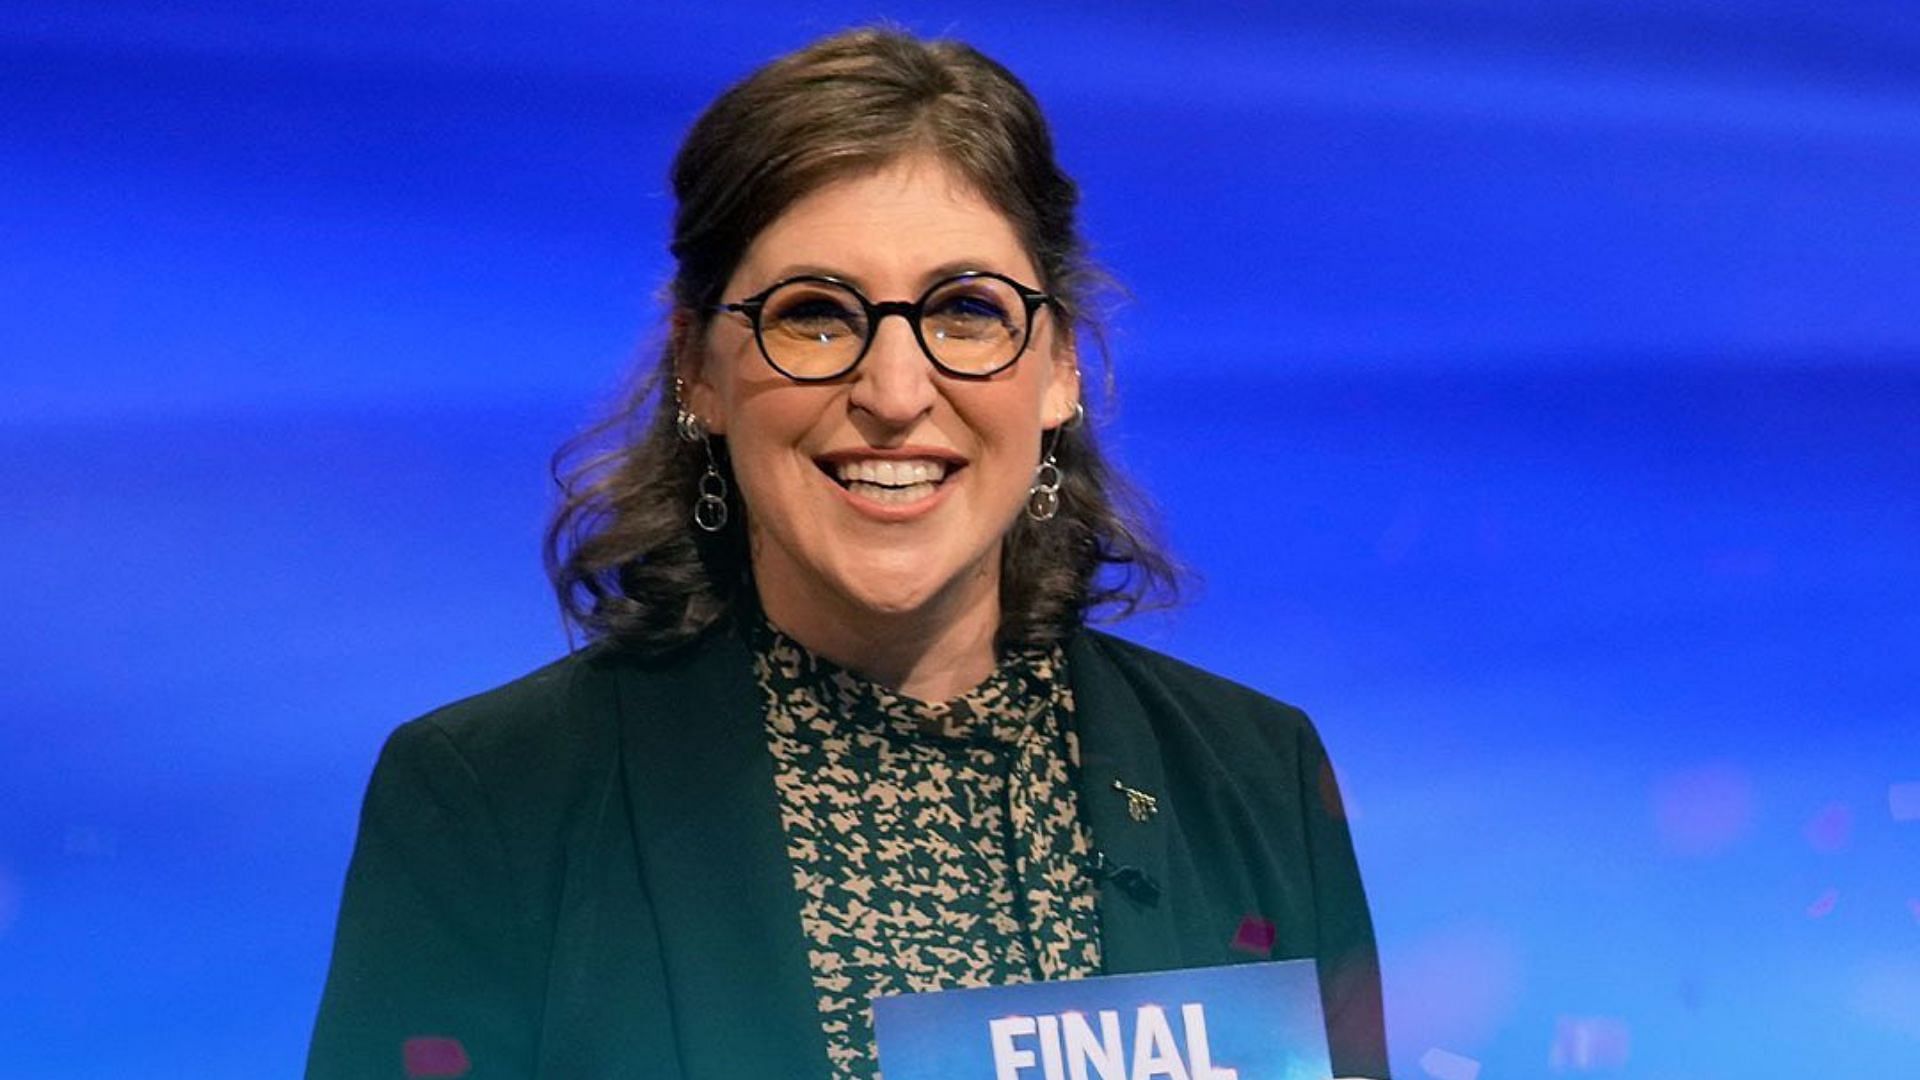 Mayim Bialik hosted the June 15, 2022 episode (Image via jeopardy/Instagram)